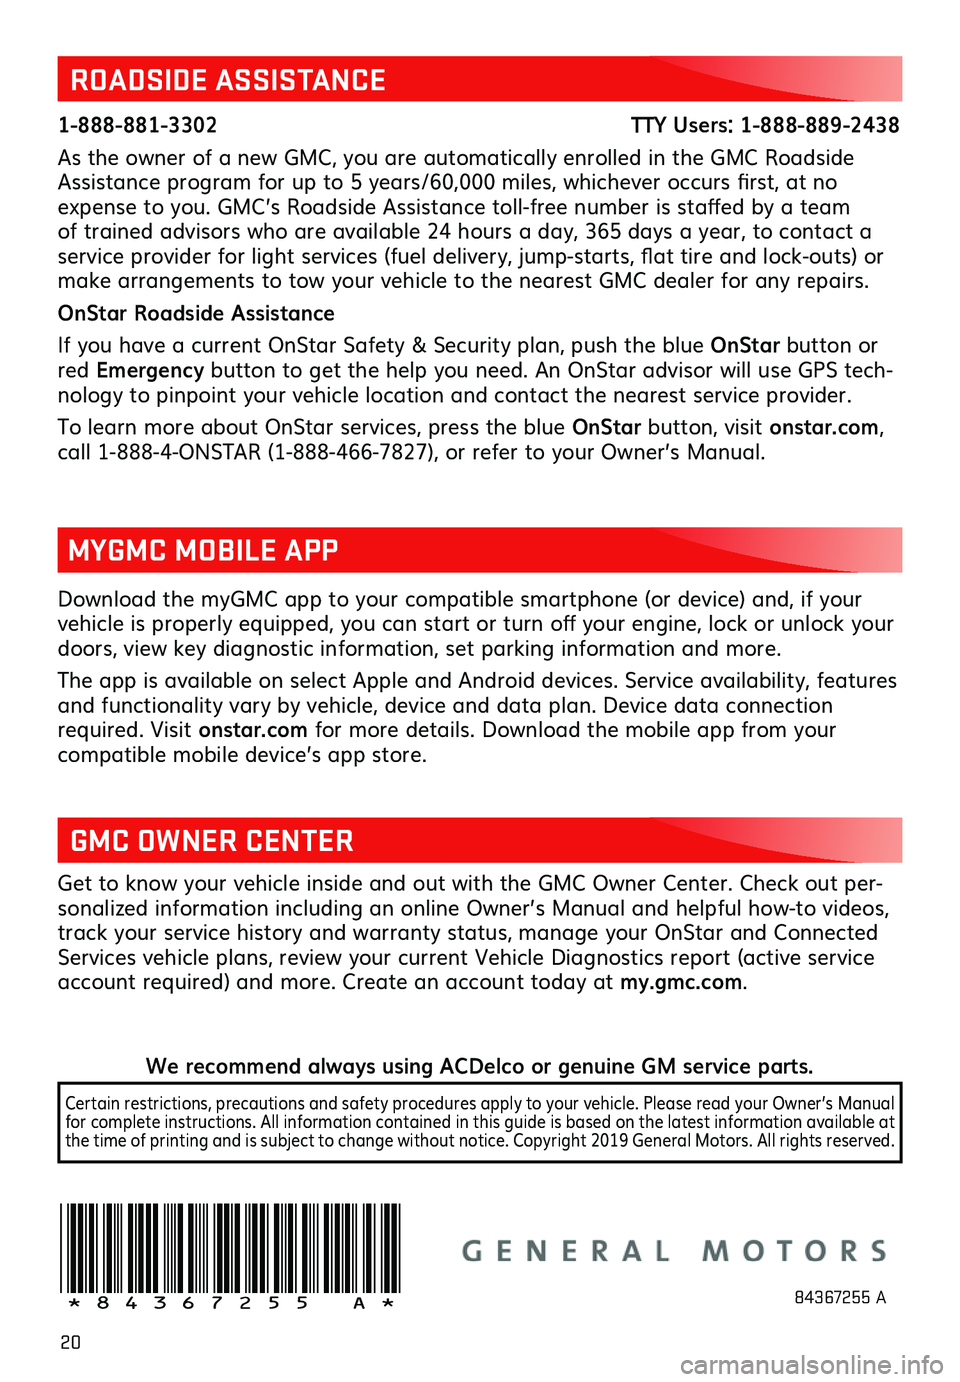 GMC YUKON 2020  Get To Know Guide 20
Download the myGMC app to your compatible smartphone (or device) and, if your vehicle is properly equipped, you can start or turn off your engine, lock or unlock your doors, view key diagnostic inf